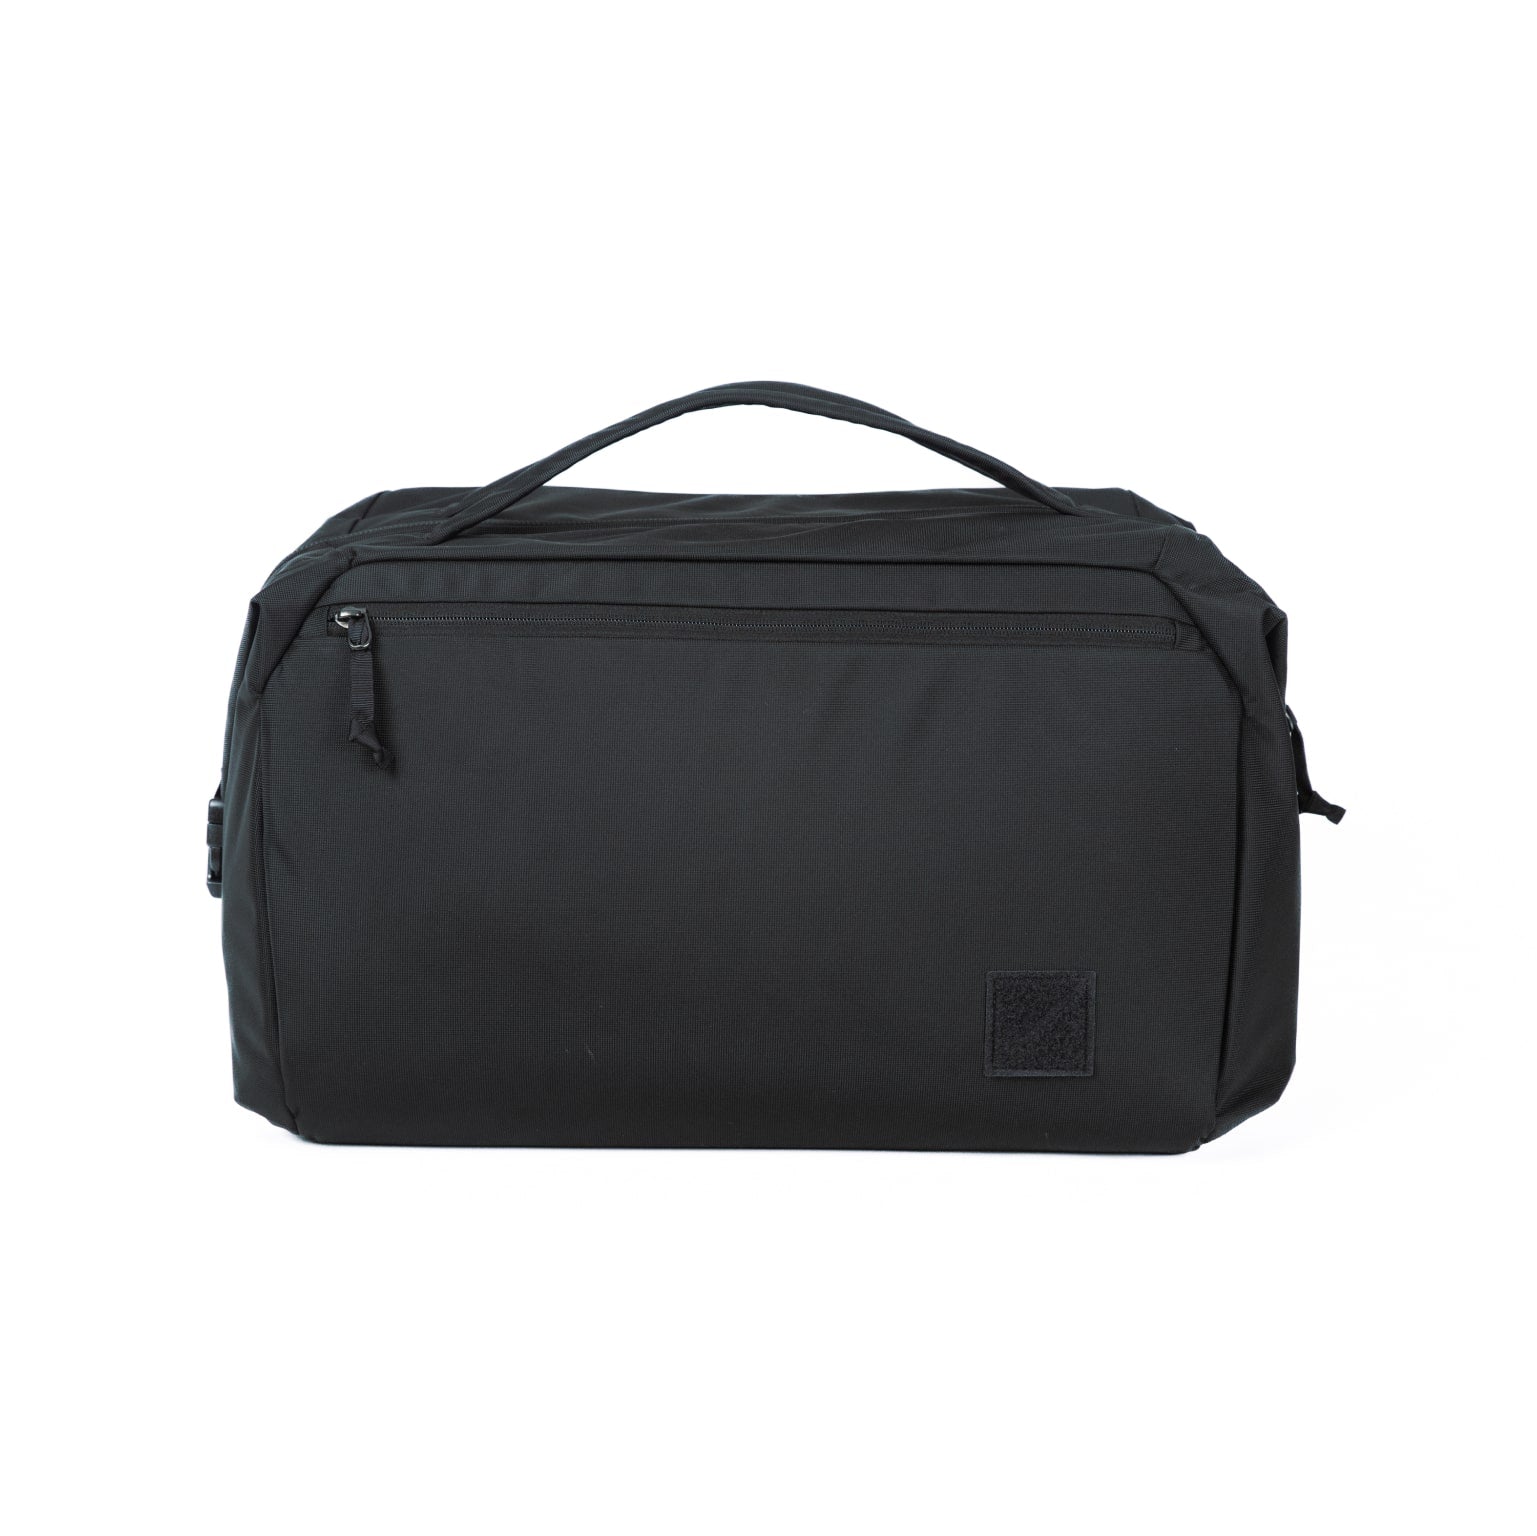 The Duffle Bag - Durable & Sleek - Made in The USA and Military-Tested